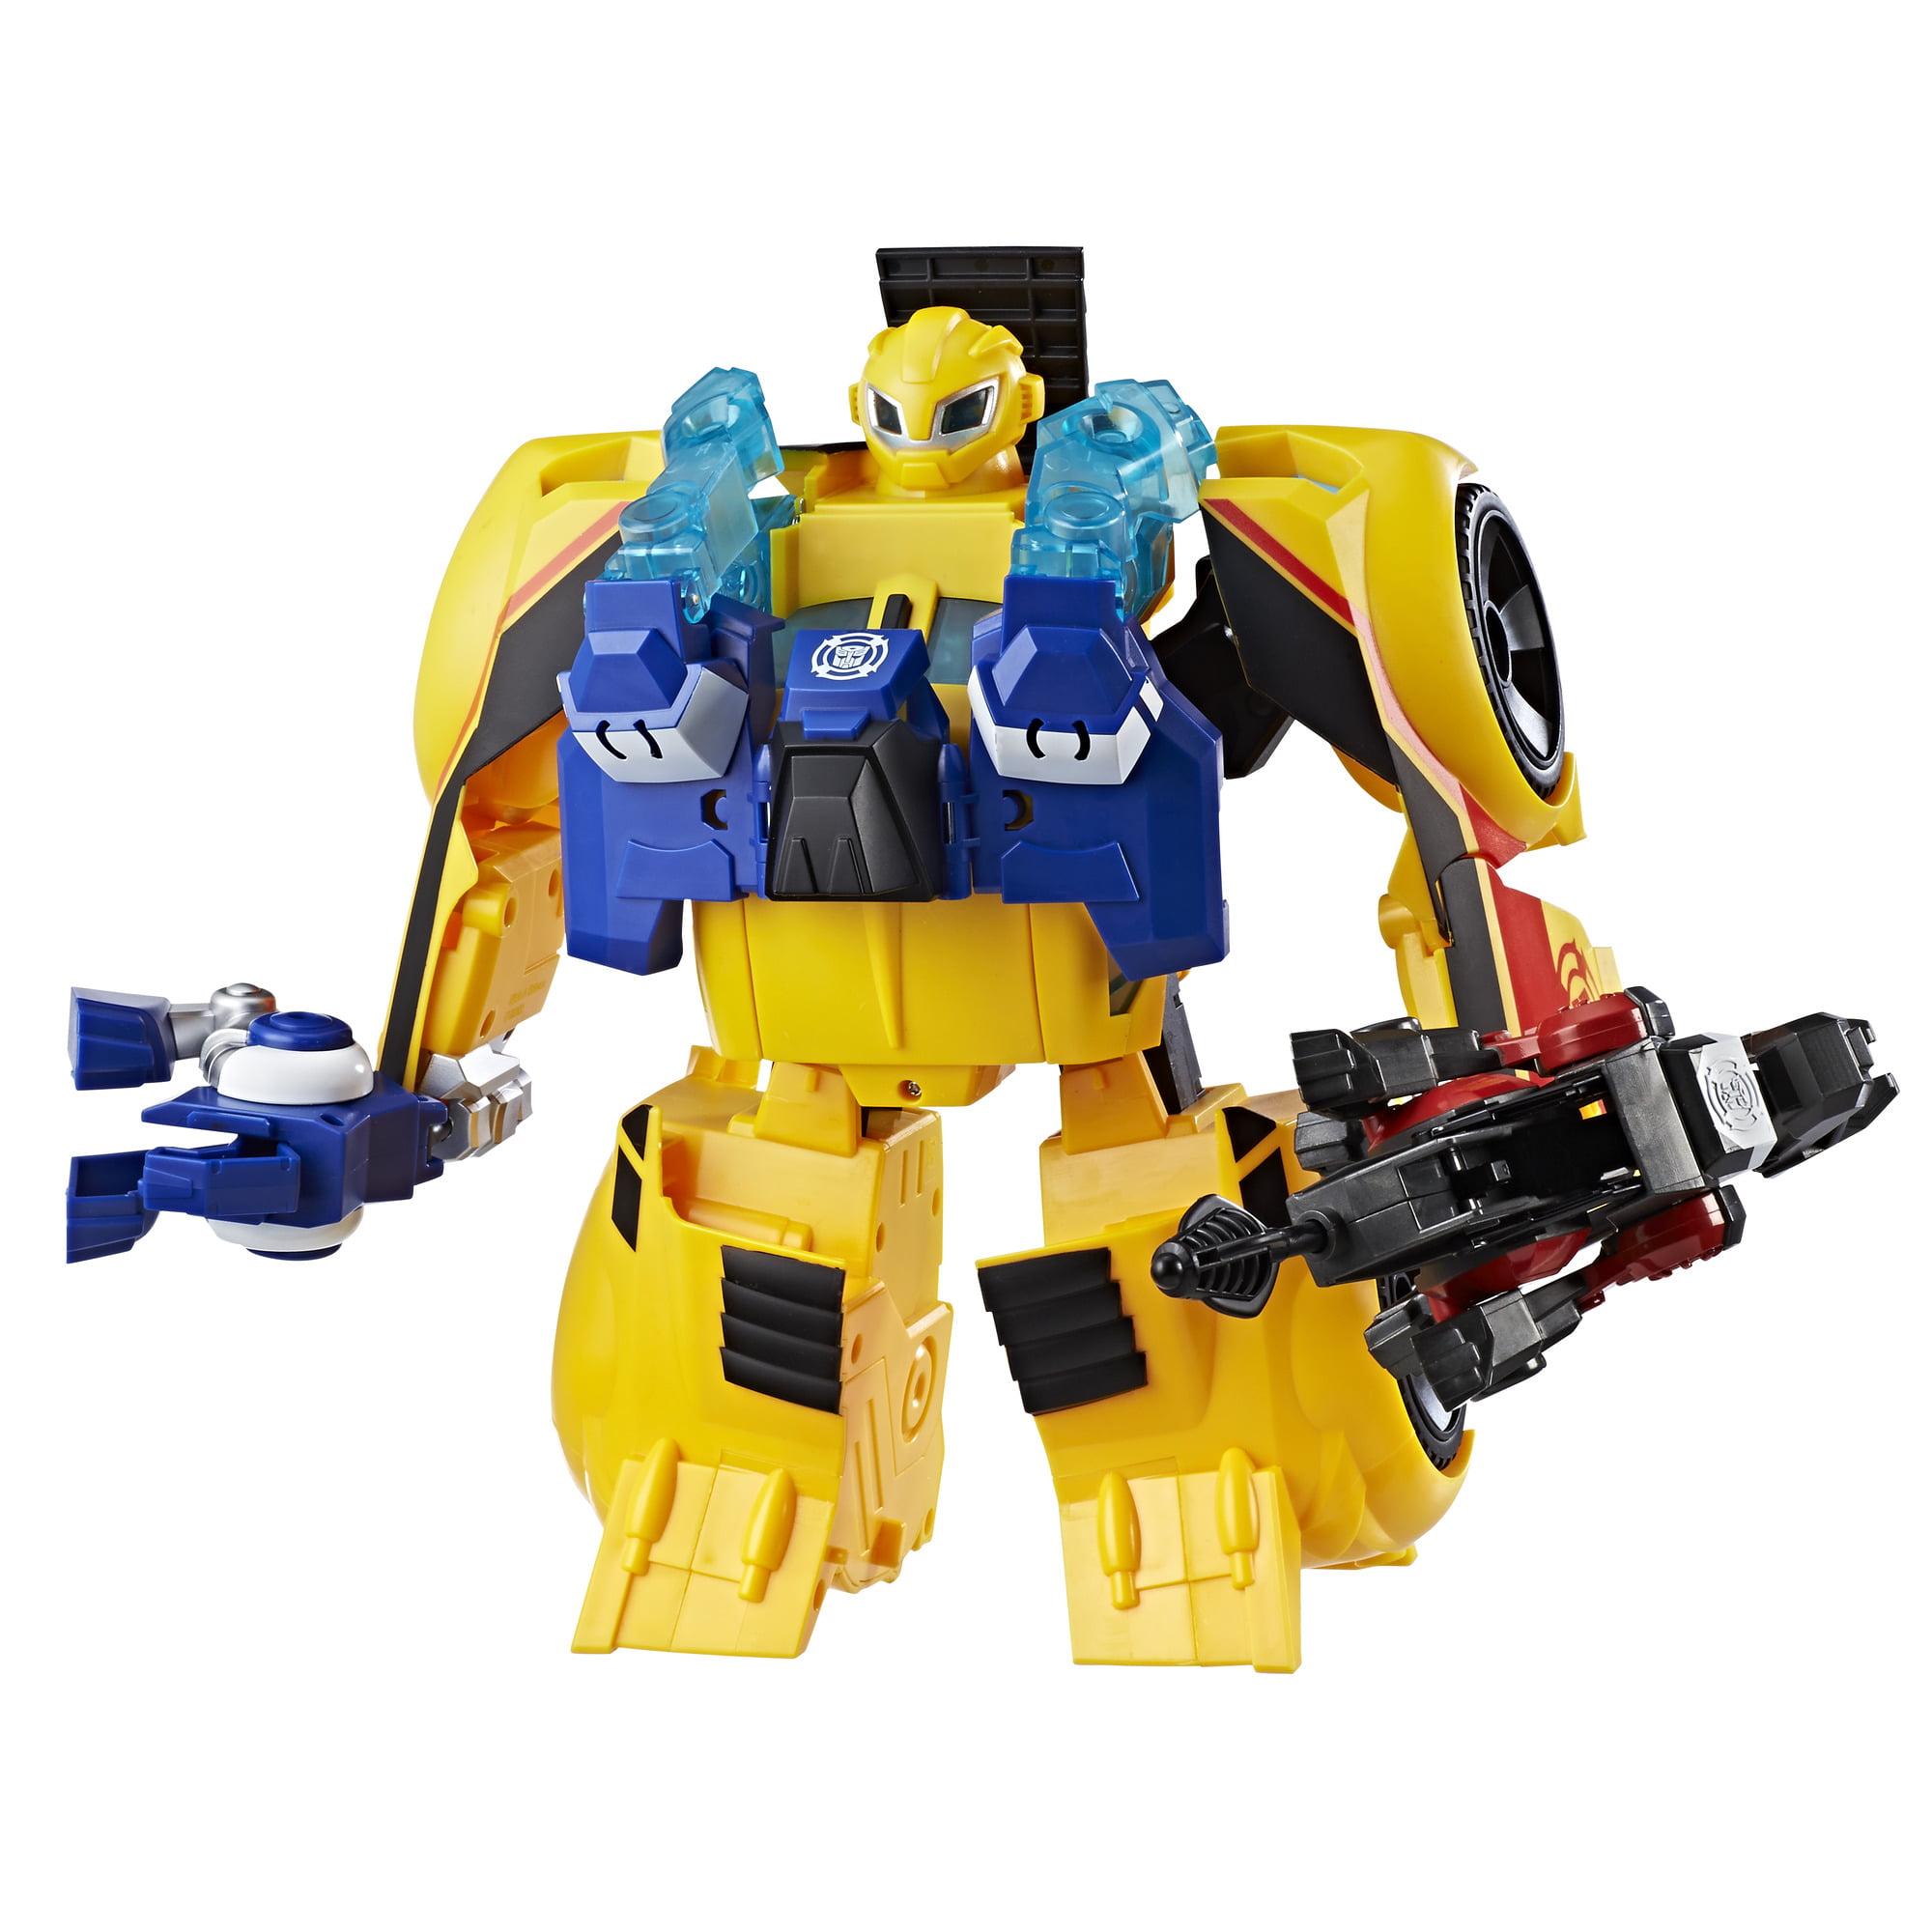 Transformers Rescue Bots Bumblebee 